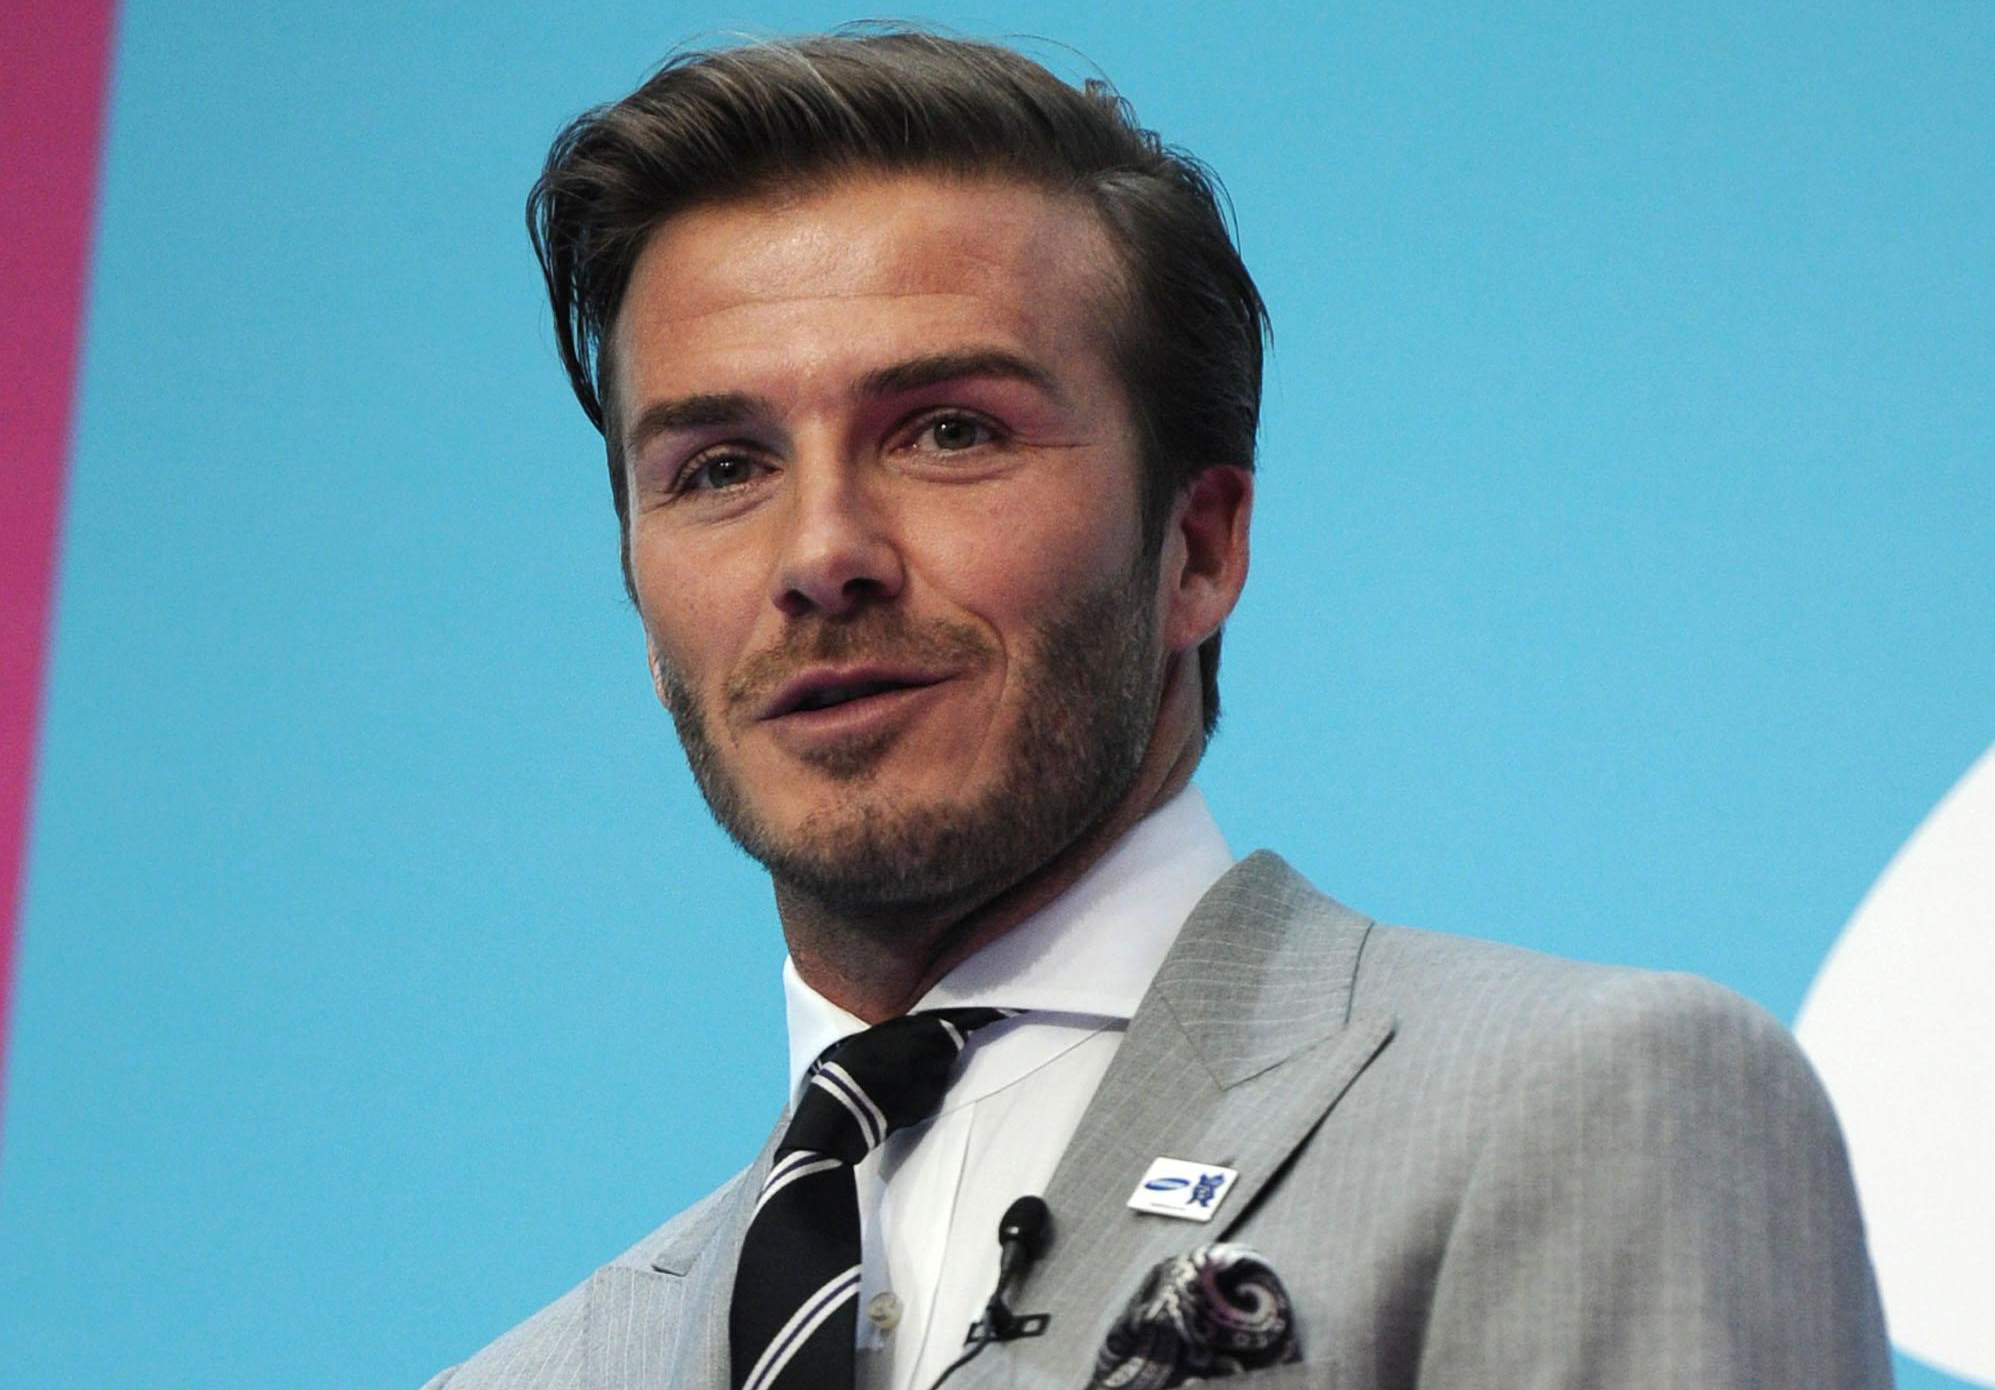 David Beckham at the launch of Samsung's Olympic Games (Carl Court/PA)